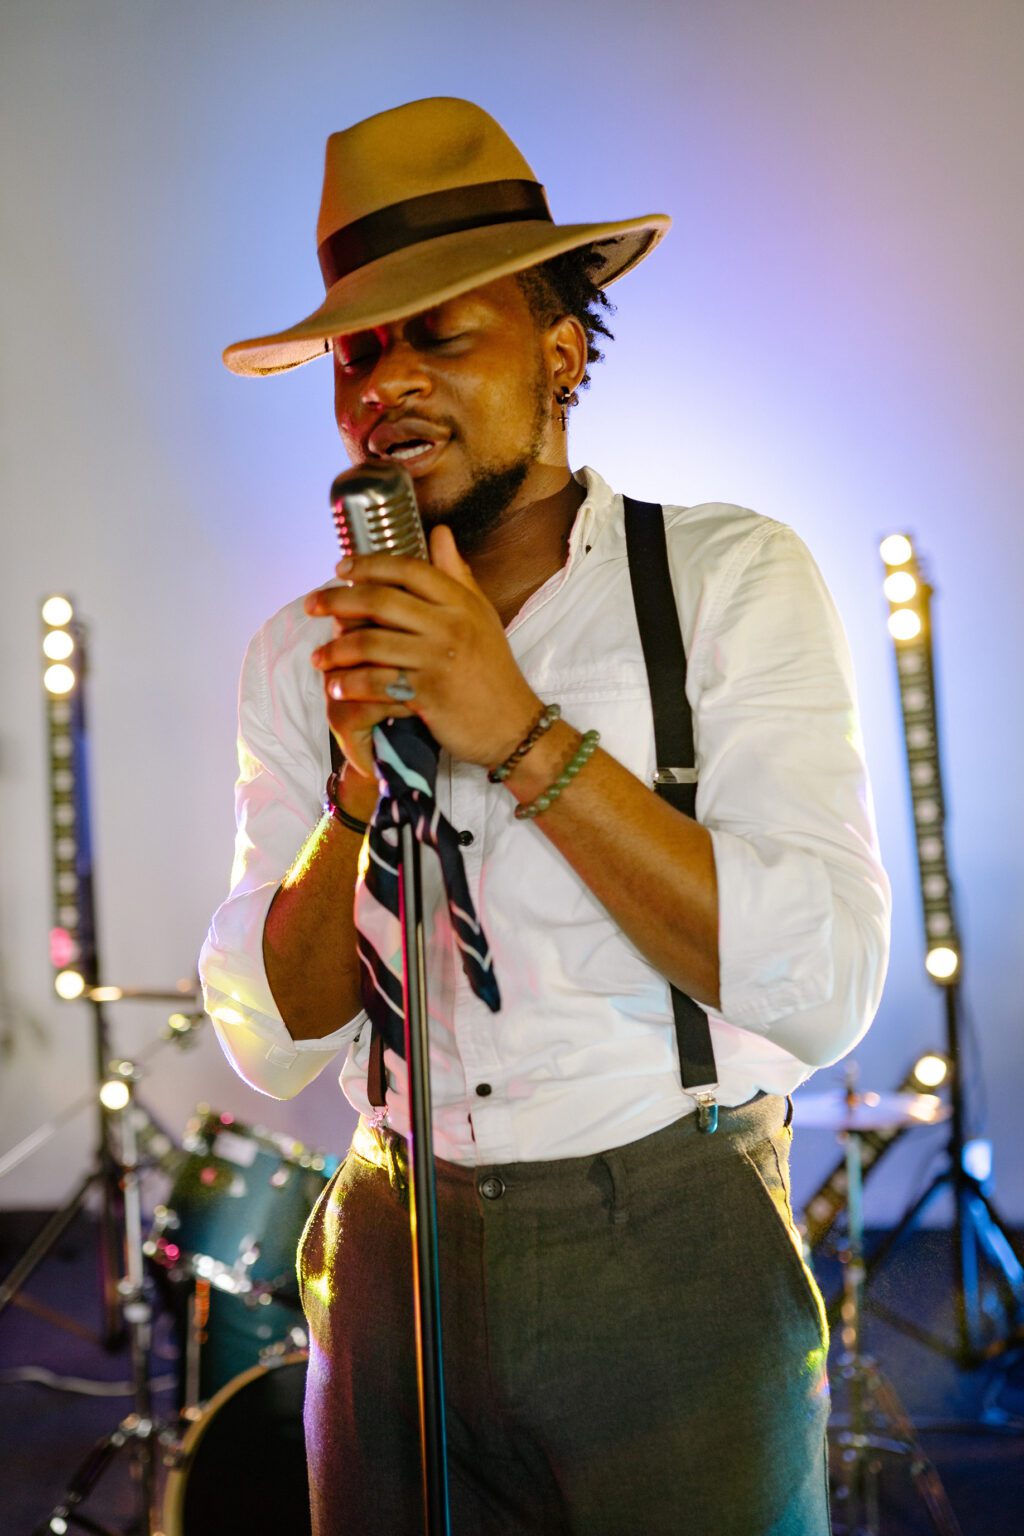 A man in a hat singing into a microphone.